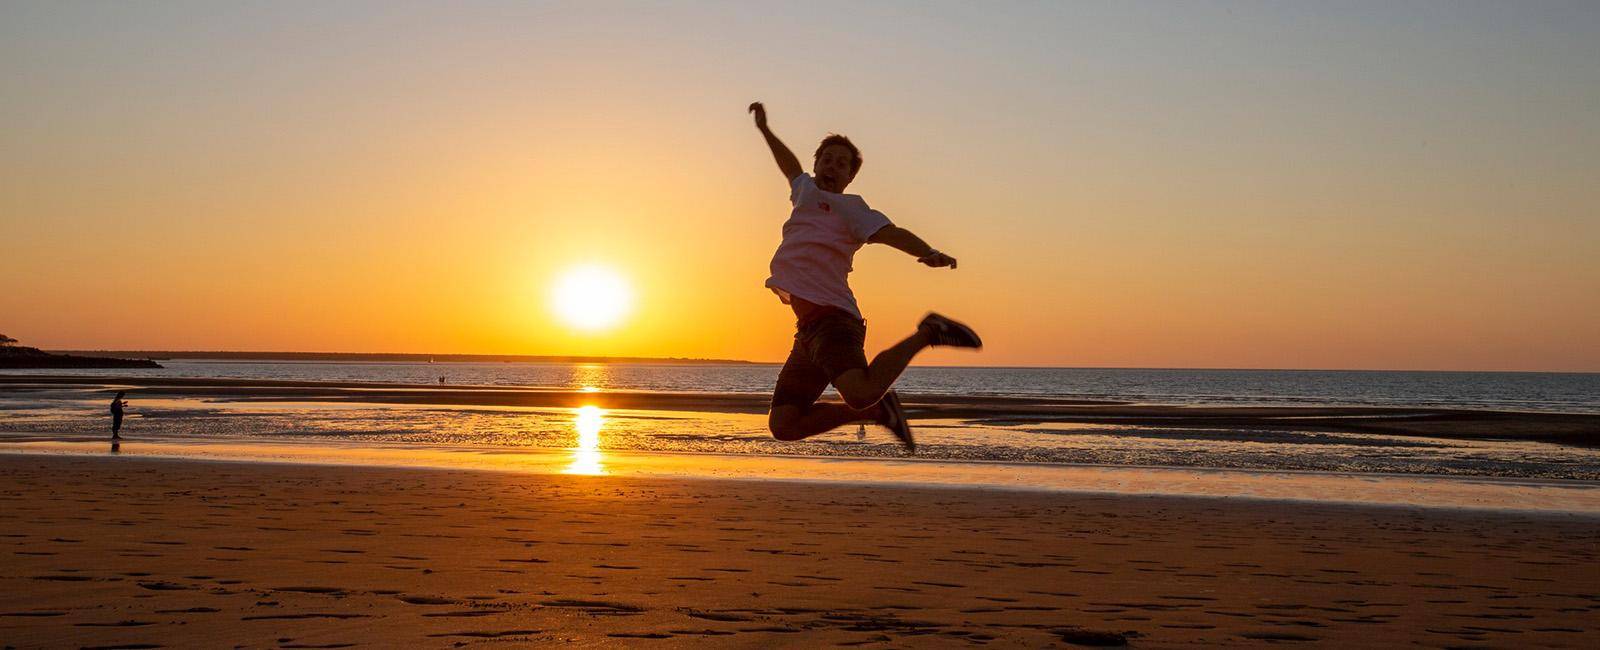 a person jumps for joy on a beach at sunset